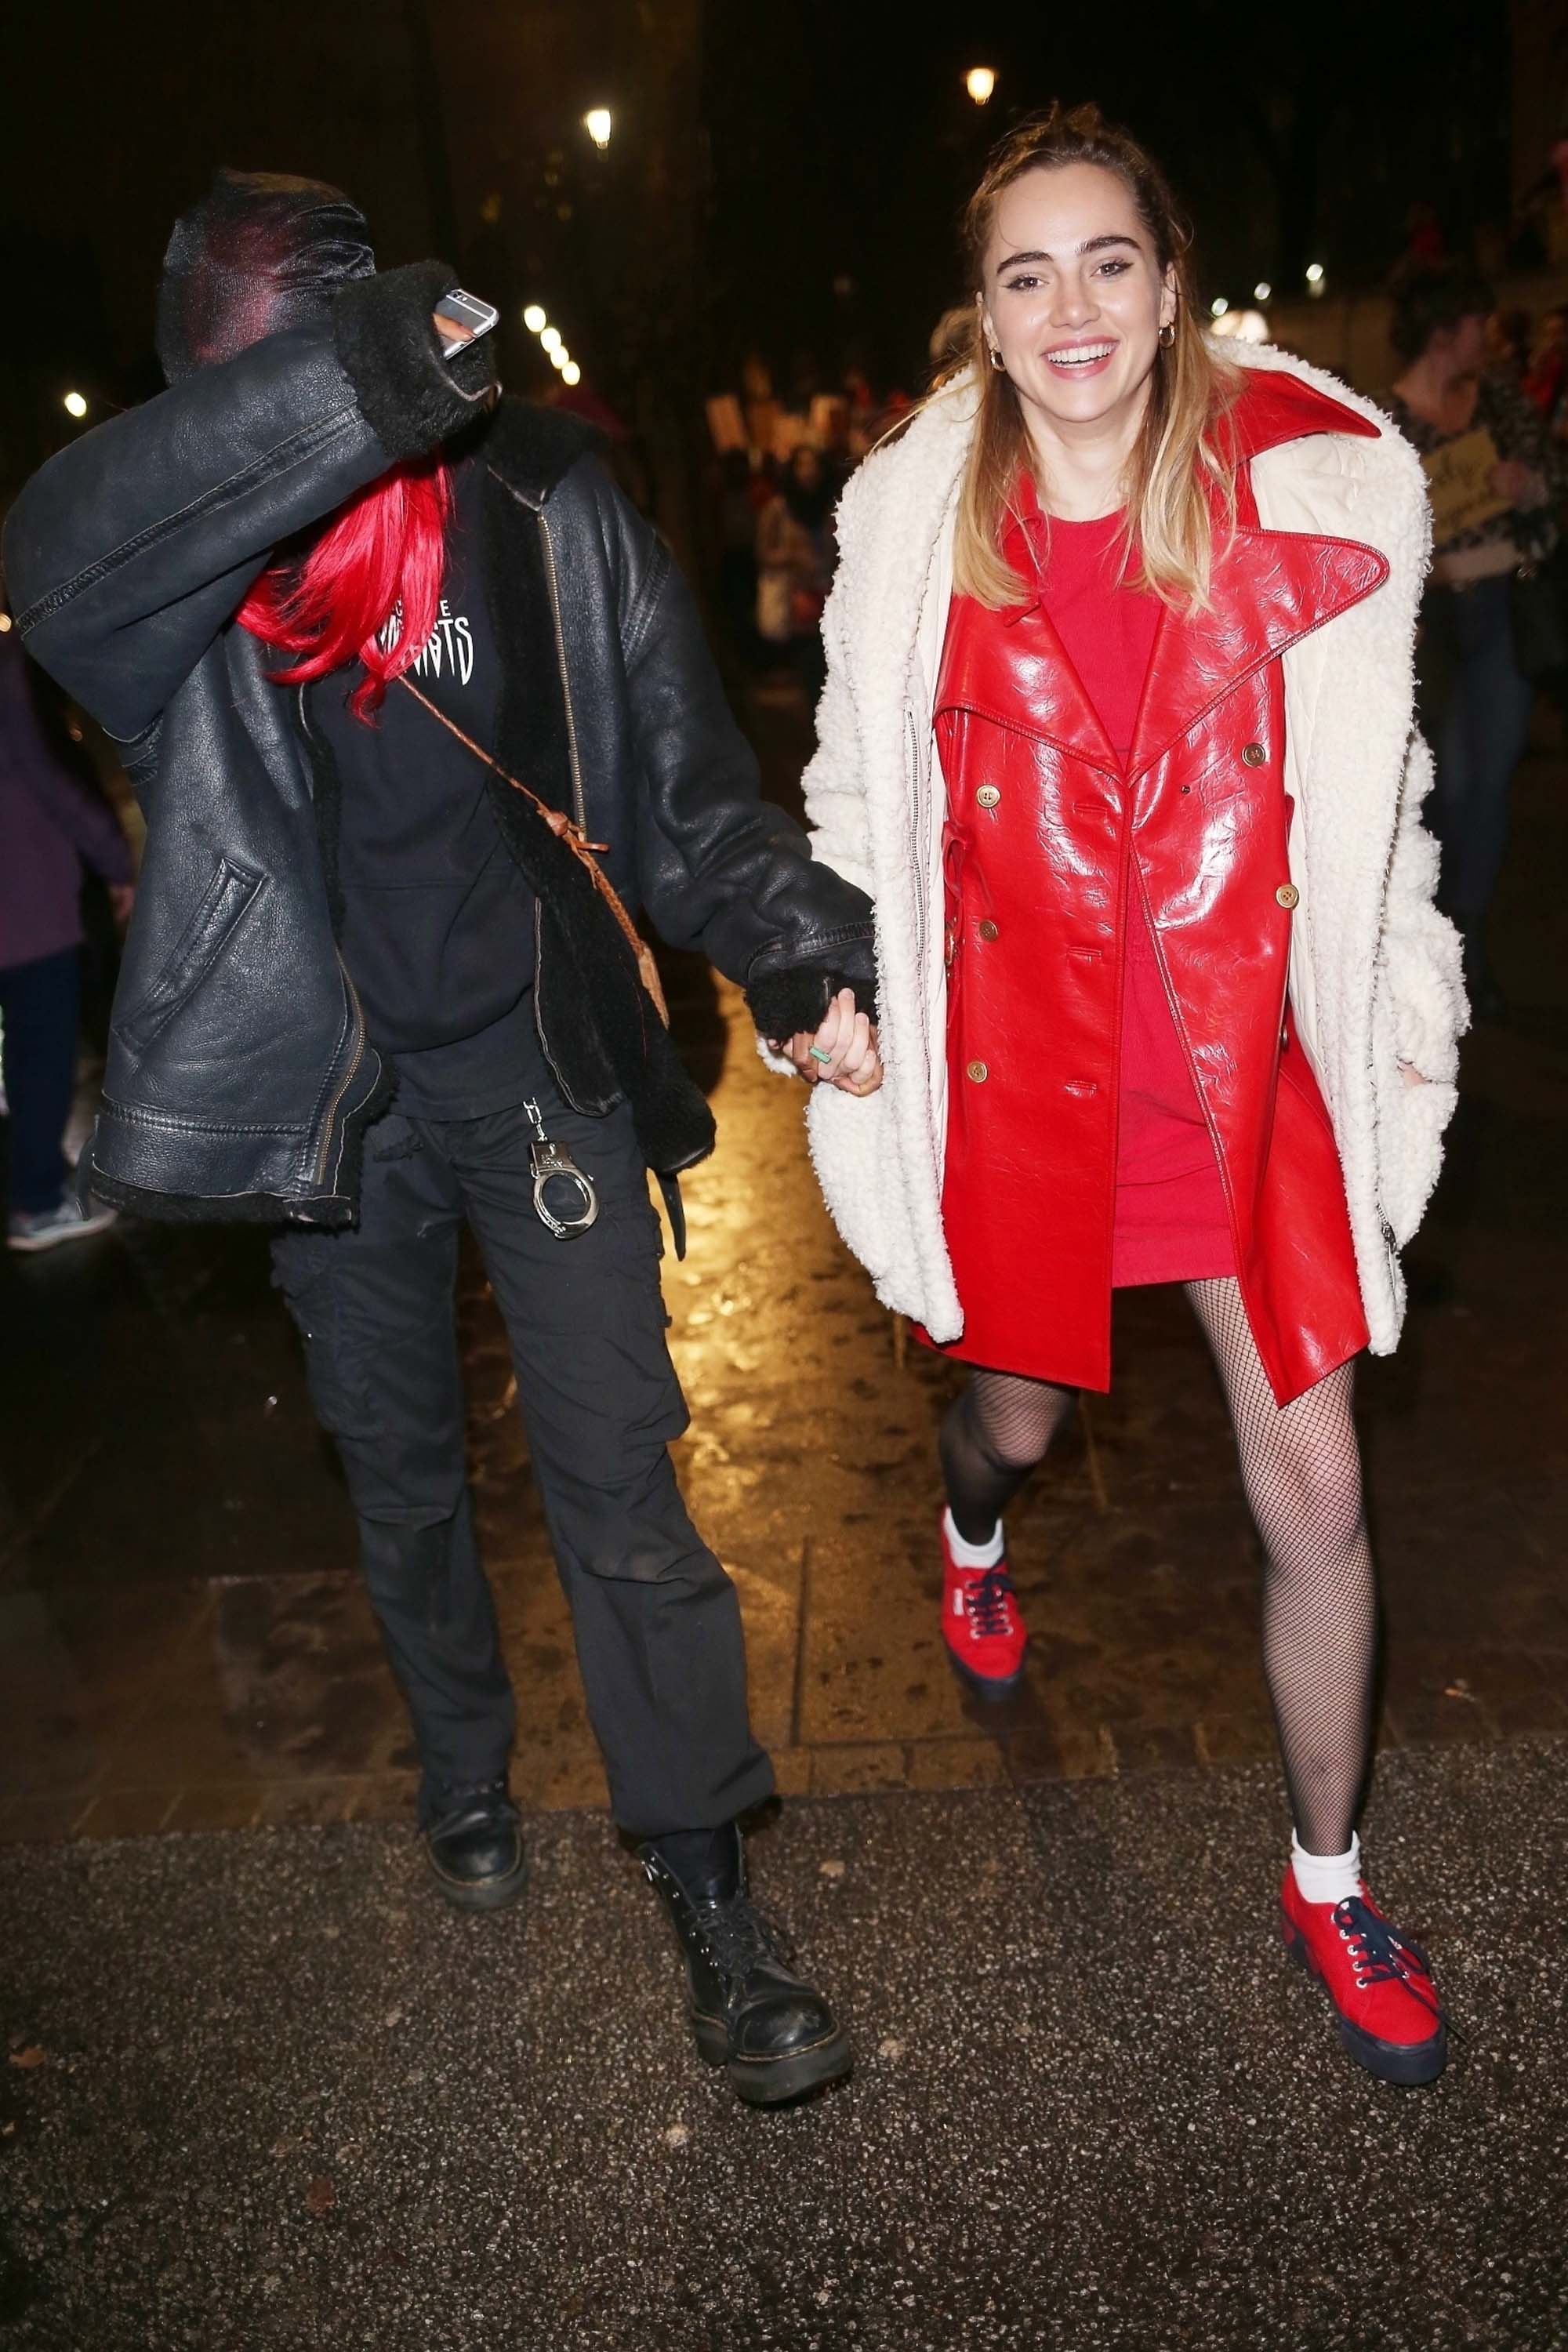 Suki Waterhouse attends #FreePeriods Protest